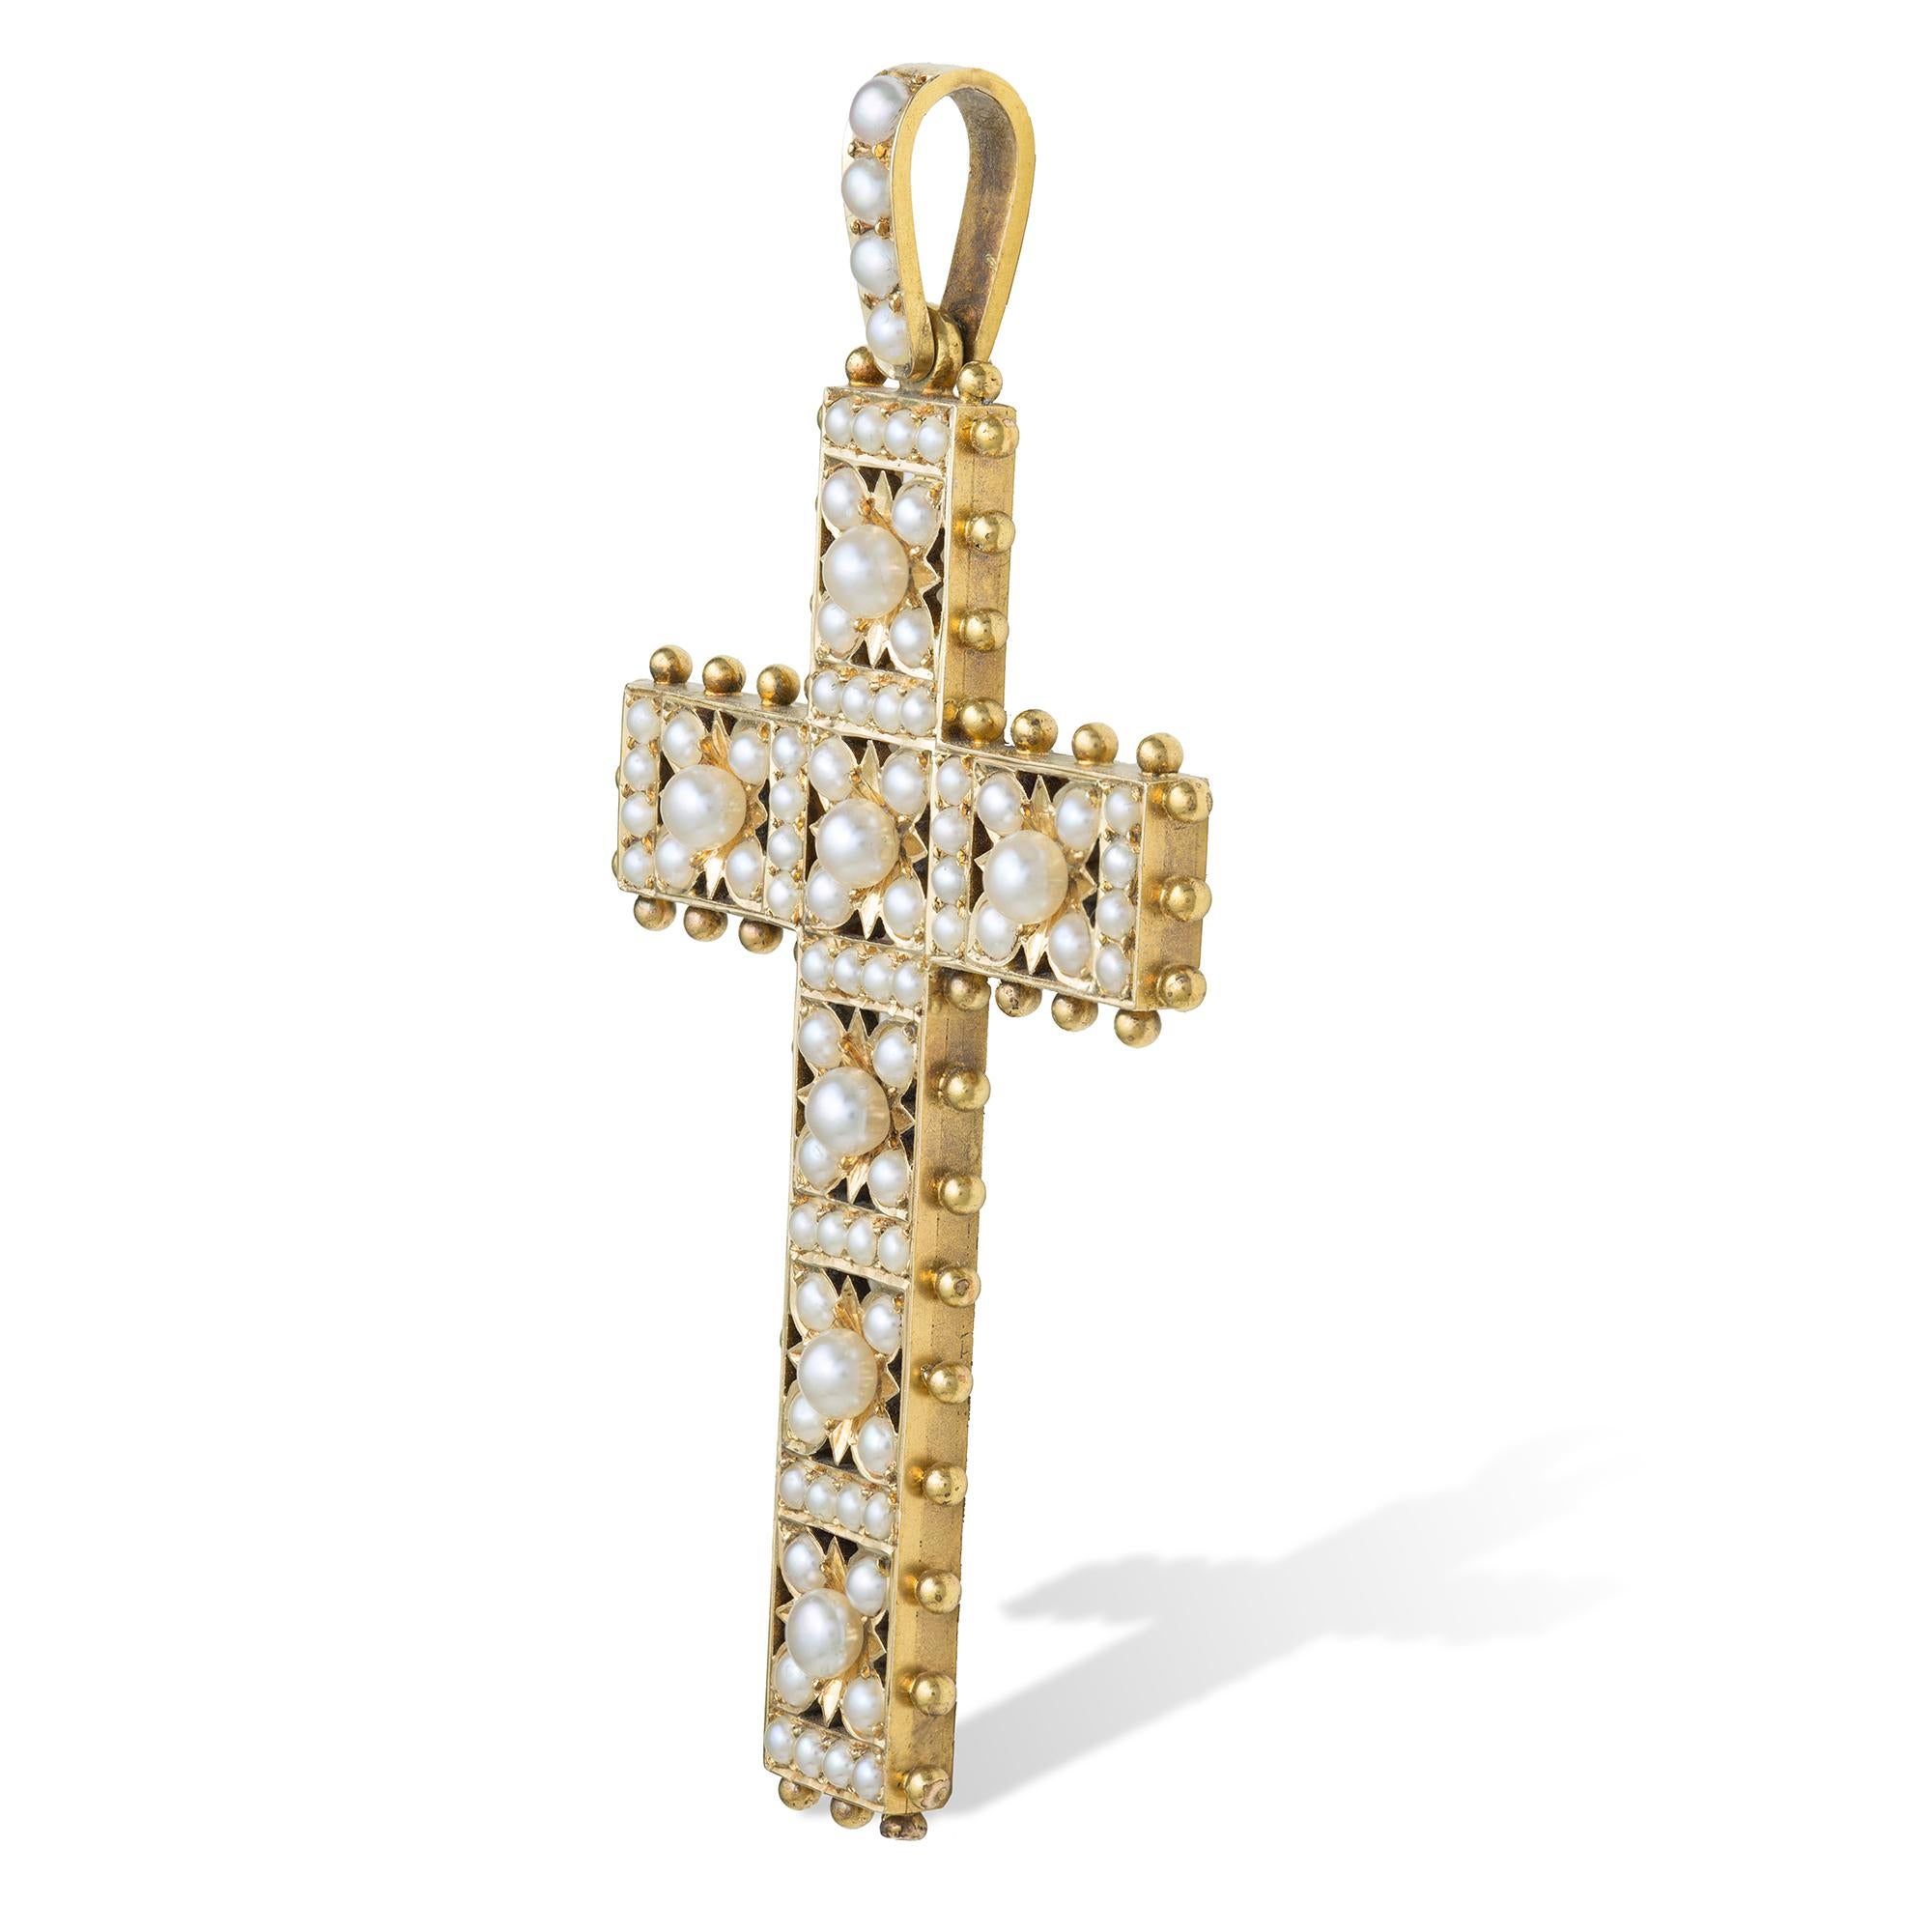 A Victorian pearl and yellow gold cross pendant, the openwork pendant in the form of a Latin cross, set throughout with natural half-pearls and embellished with yellow gold beaded decoration, to a yellow gold mount and pearl-set loop, circa 1870,